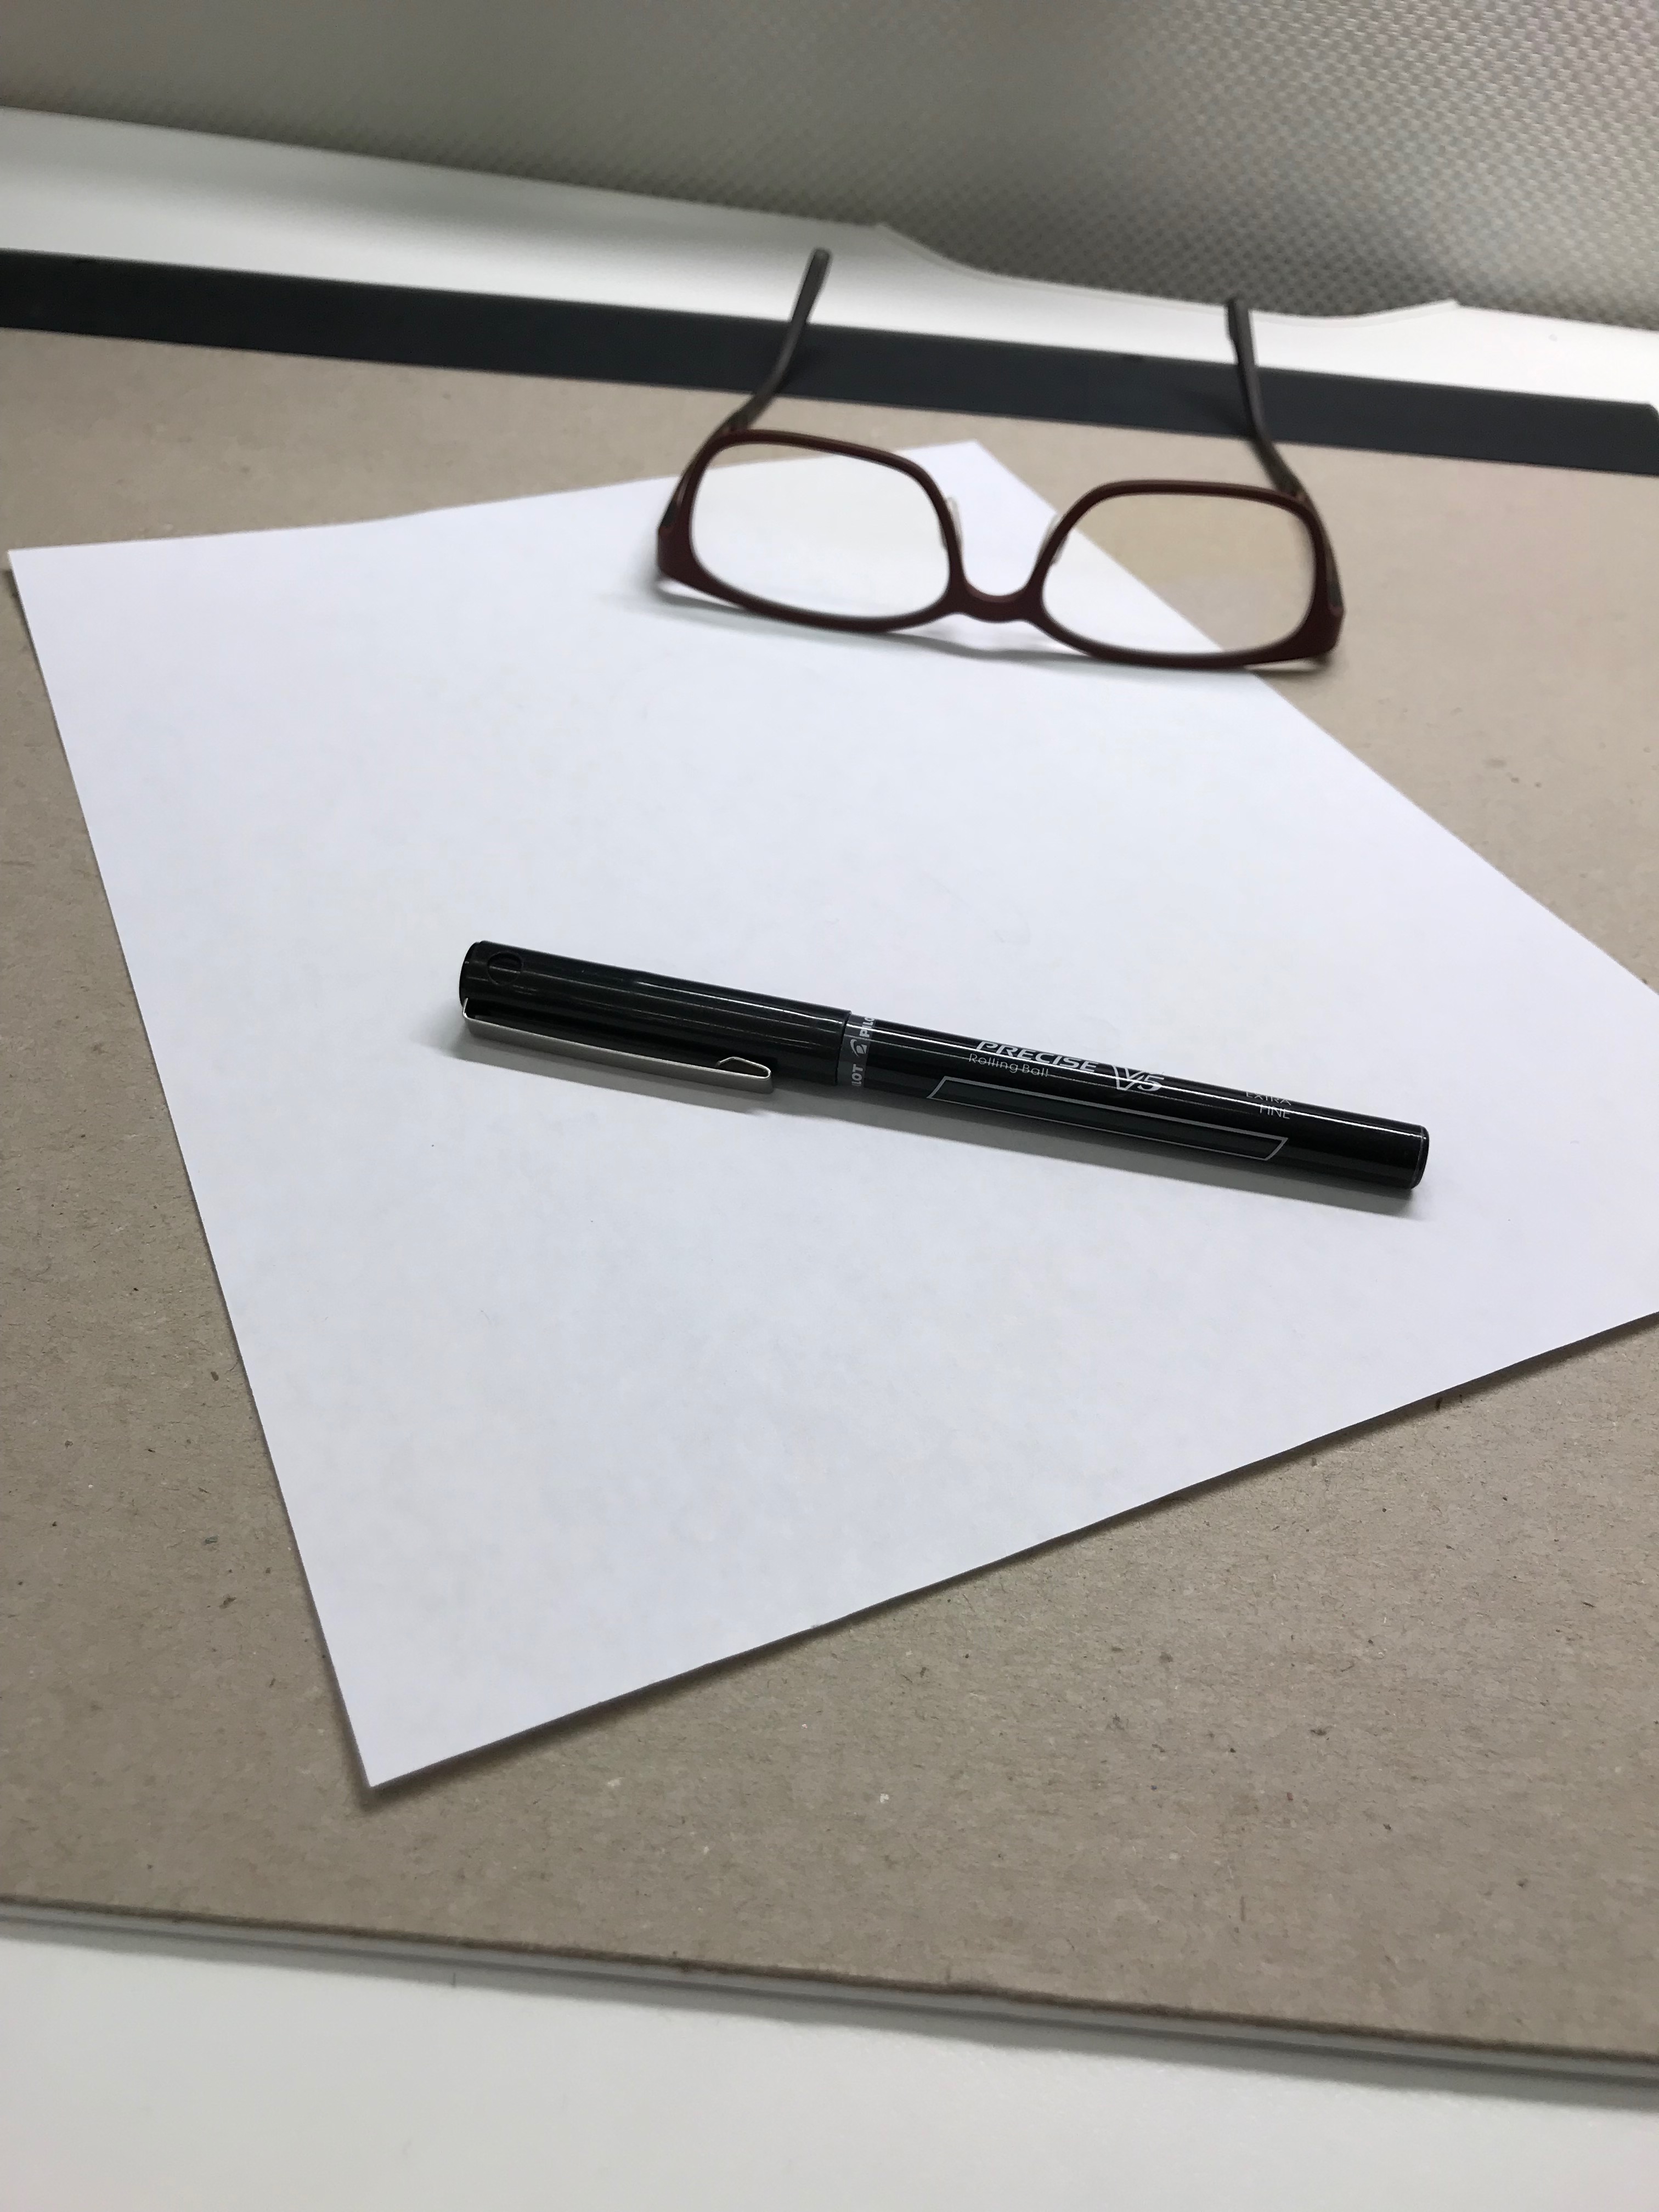 Piece of paper, pen and glasses on a desk